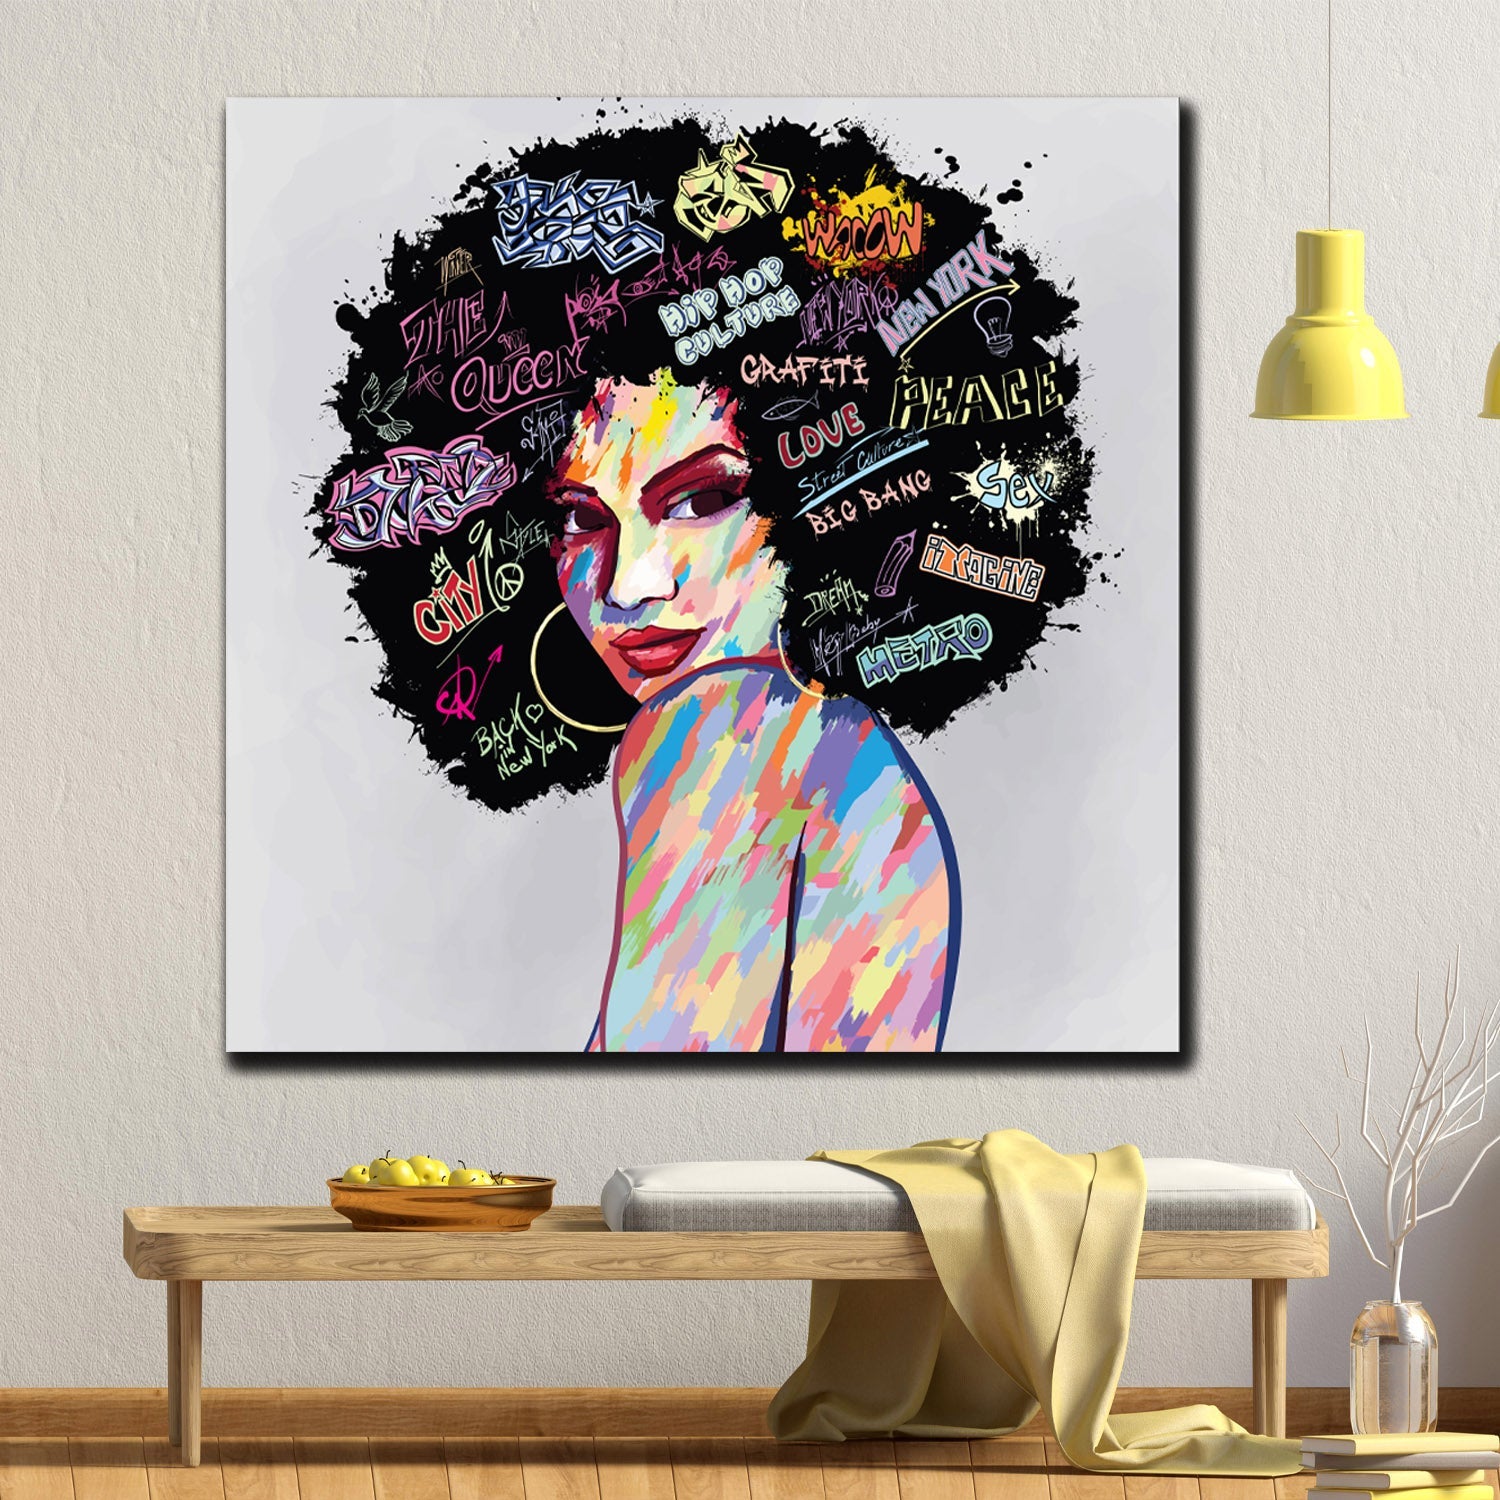 https://cdn.shopify.com/s/files/1/0387/9986/8044/products/HipHopWomanCanvasArtprintStretched-3.jpg